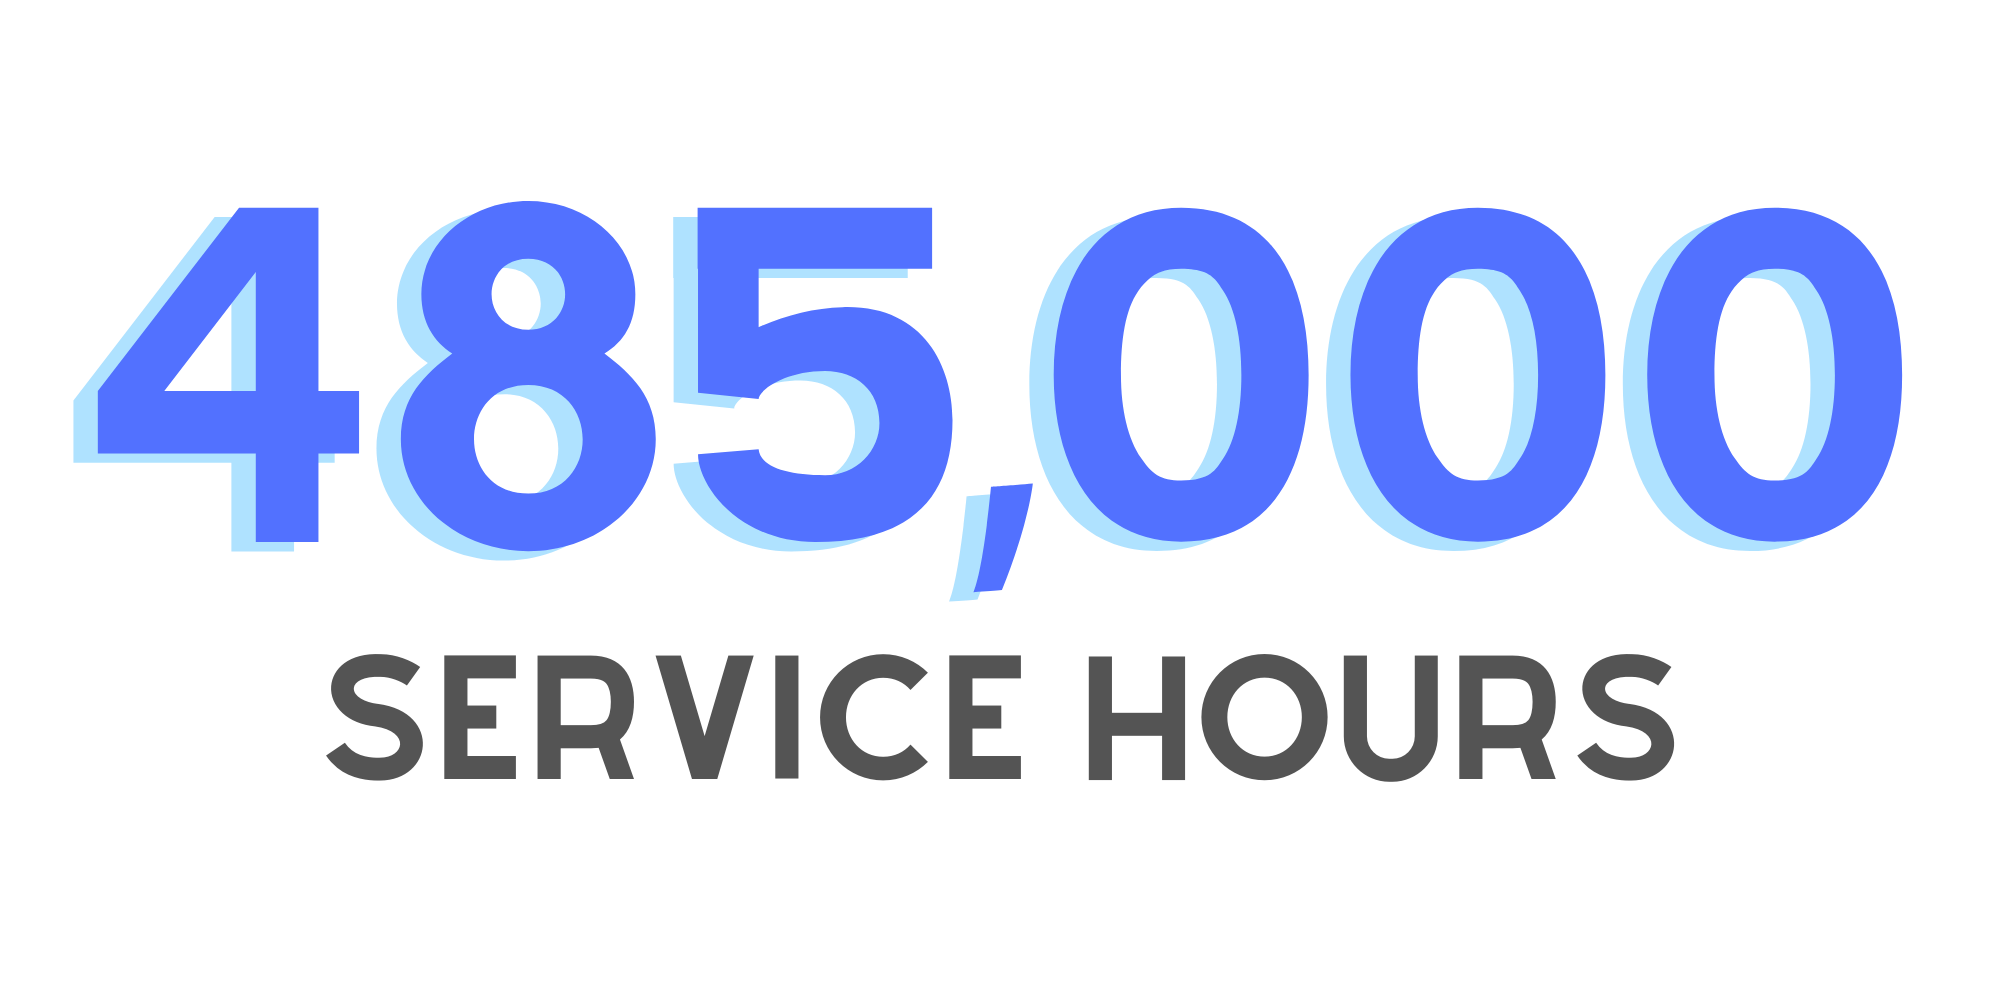 435,000 service hours